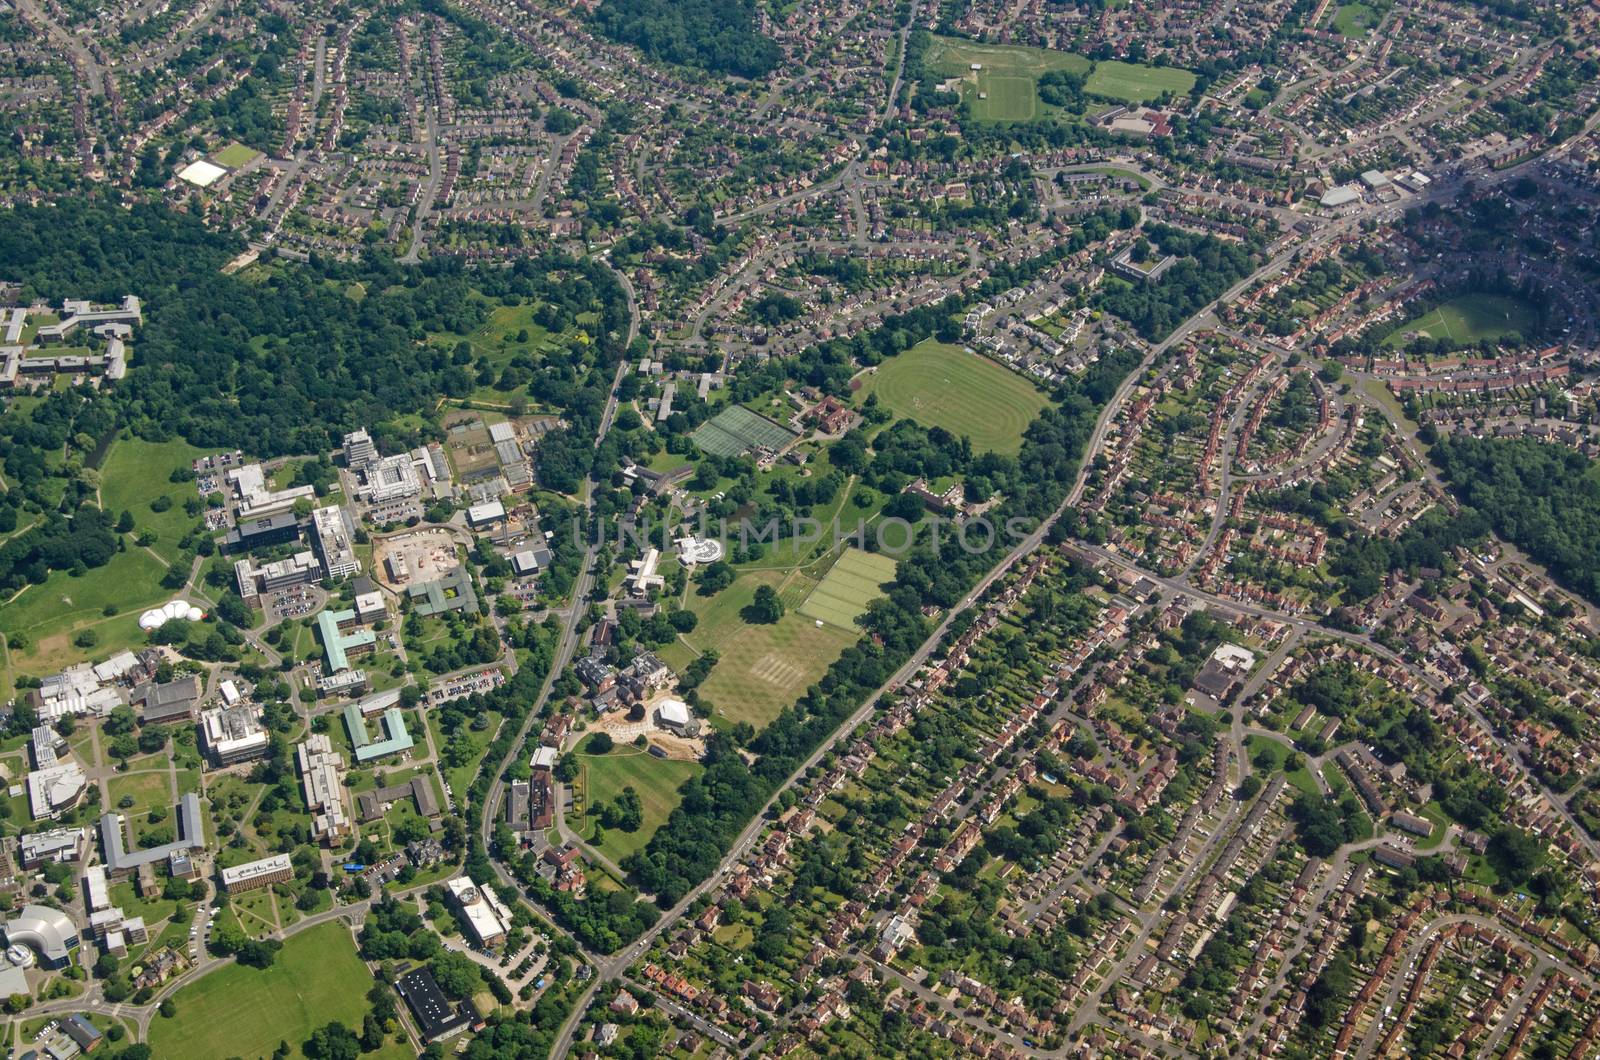 Aerial view of the University of Reading, Whiteknight Campus in the southern part of the town in Berkshire.  Viewed on a sunny summer day.